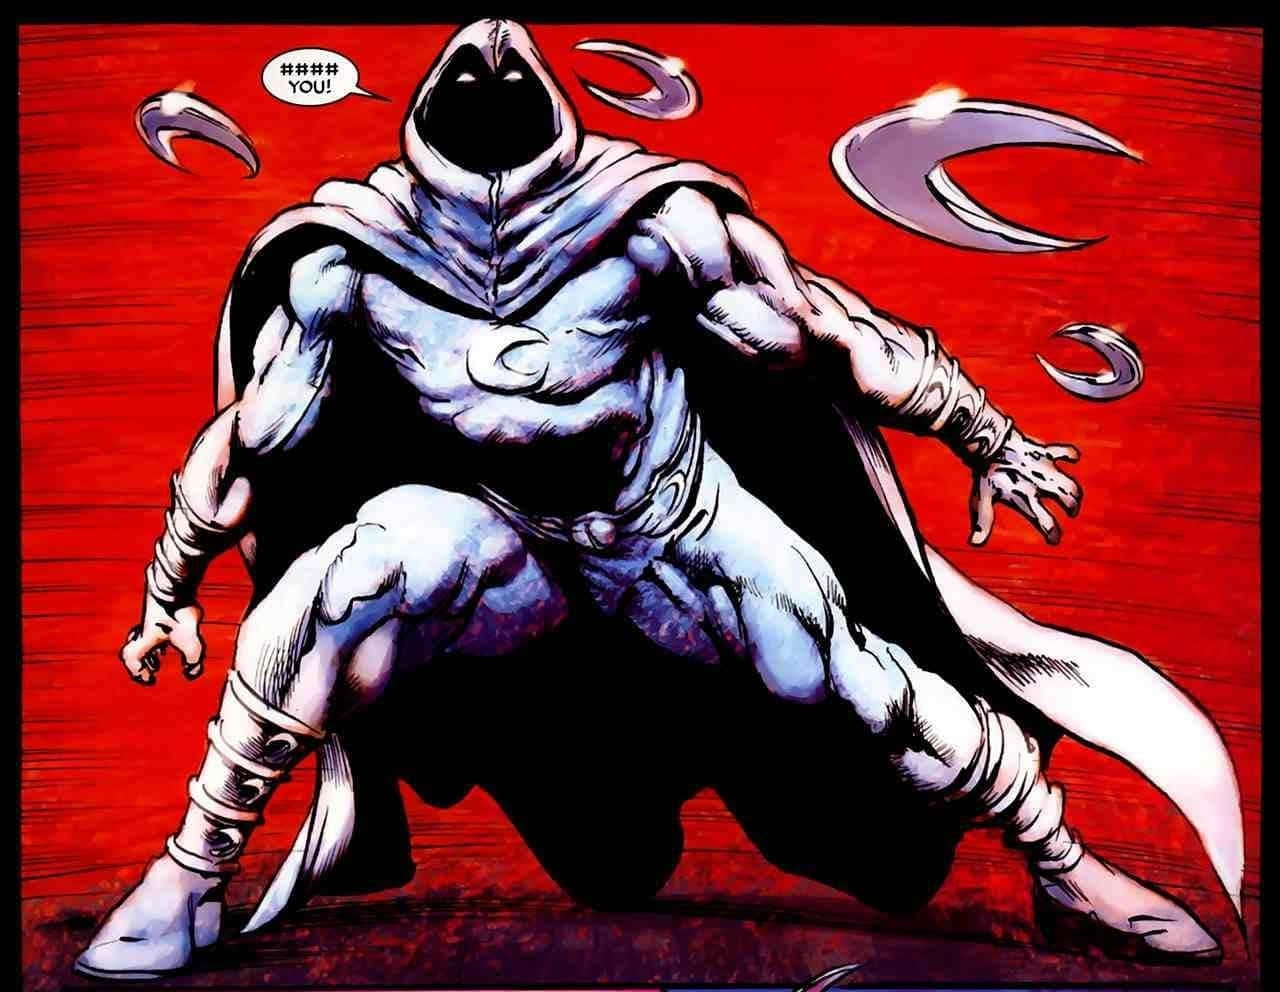 "The Spectacular Moon Knight"